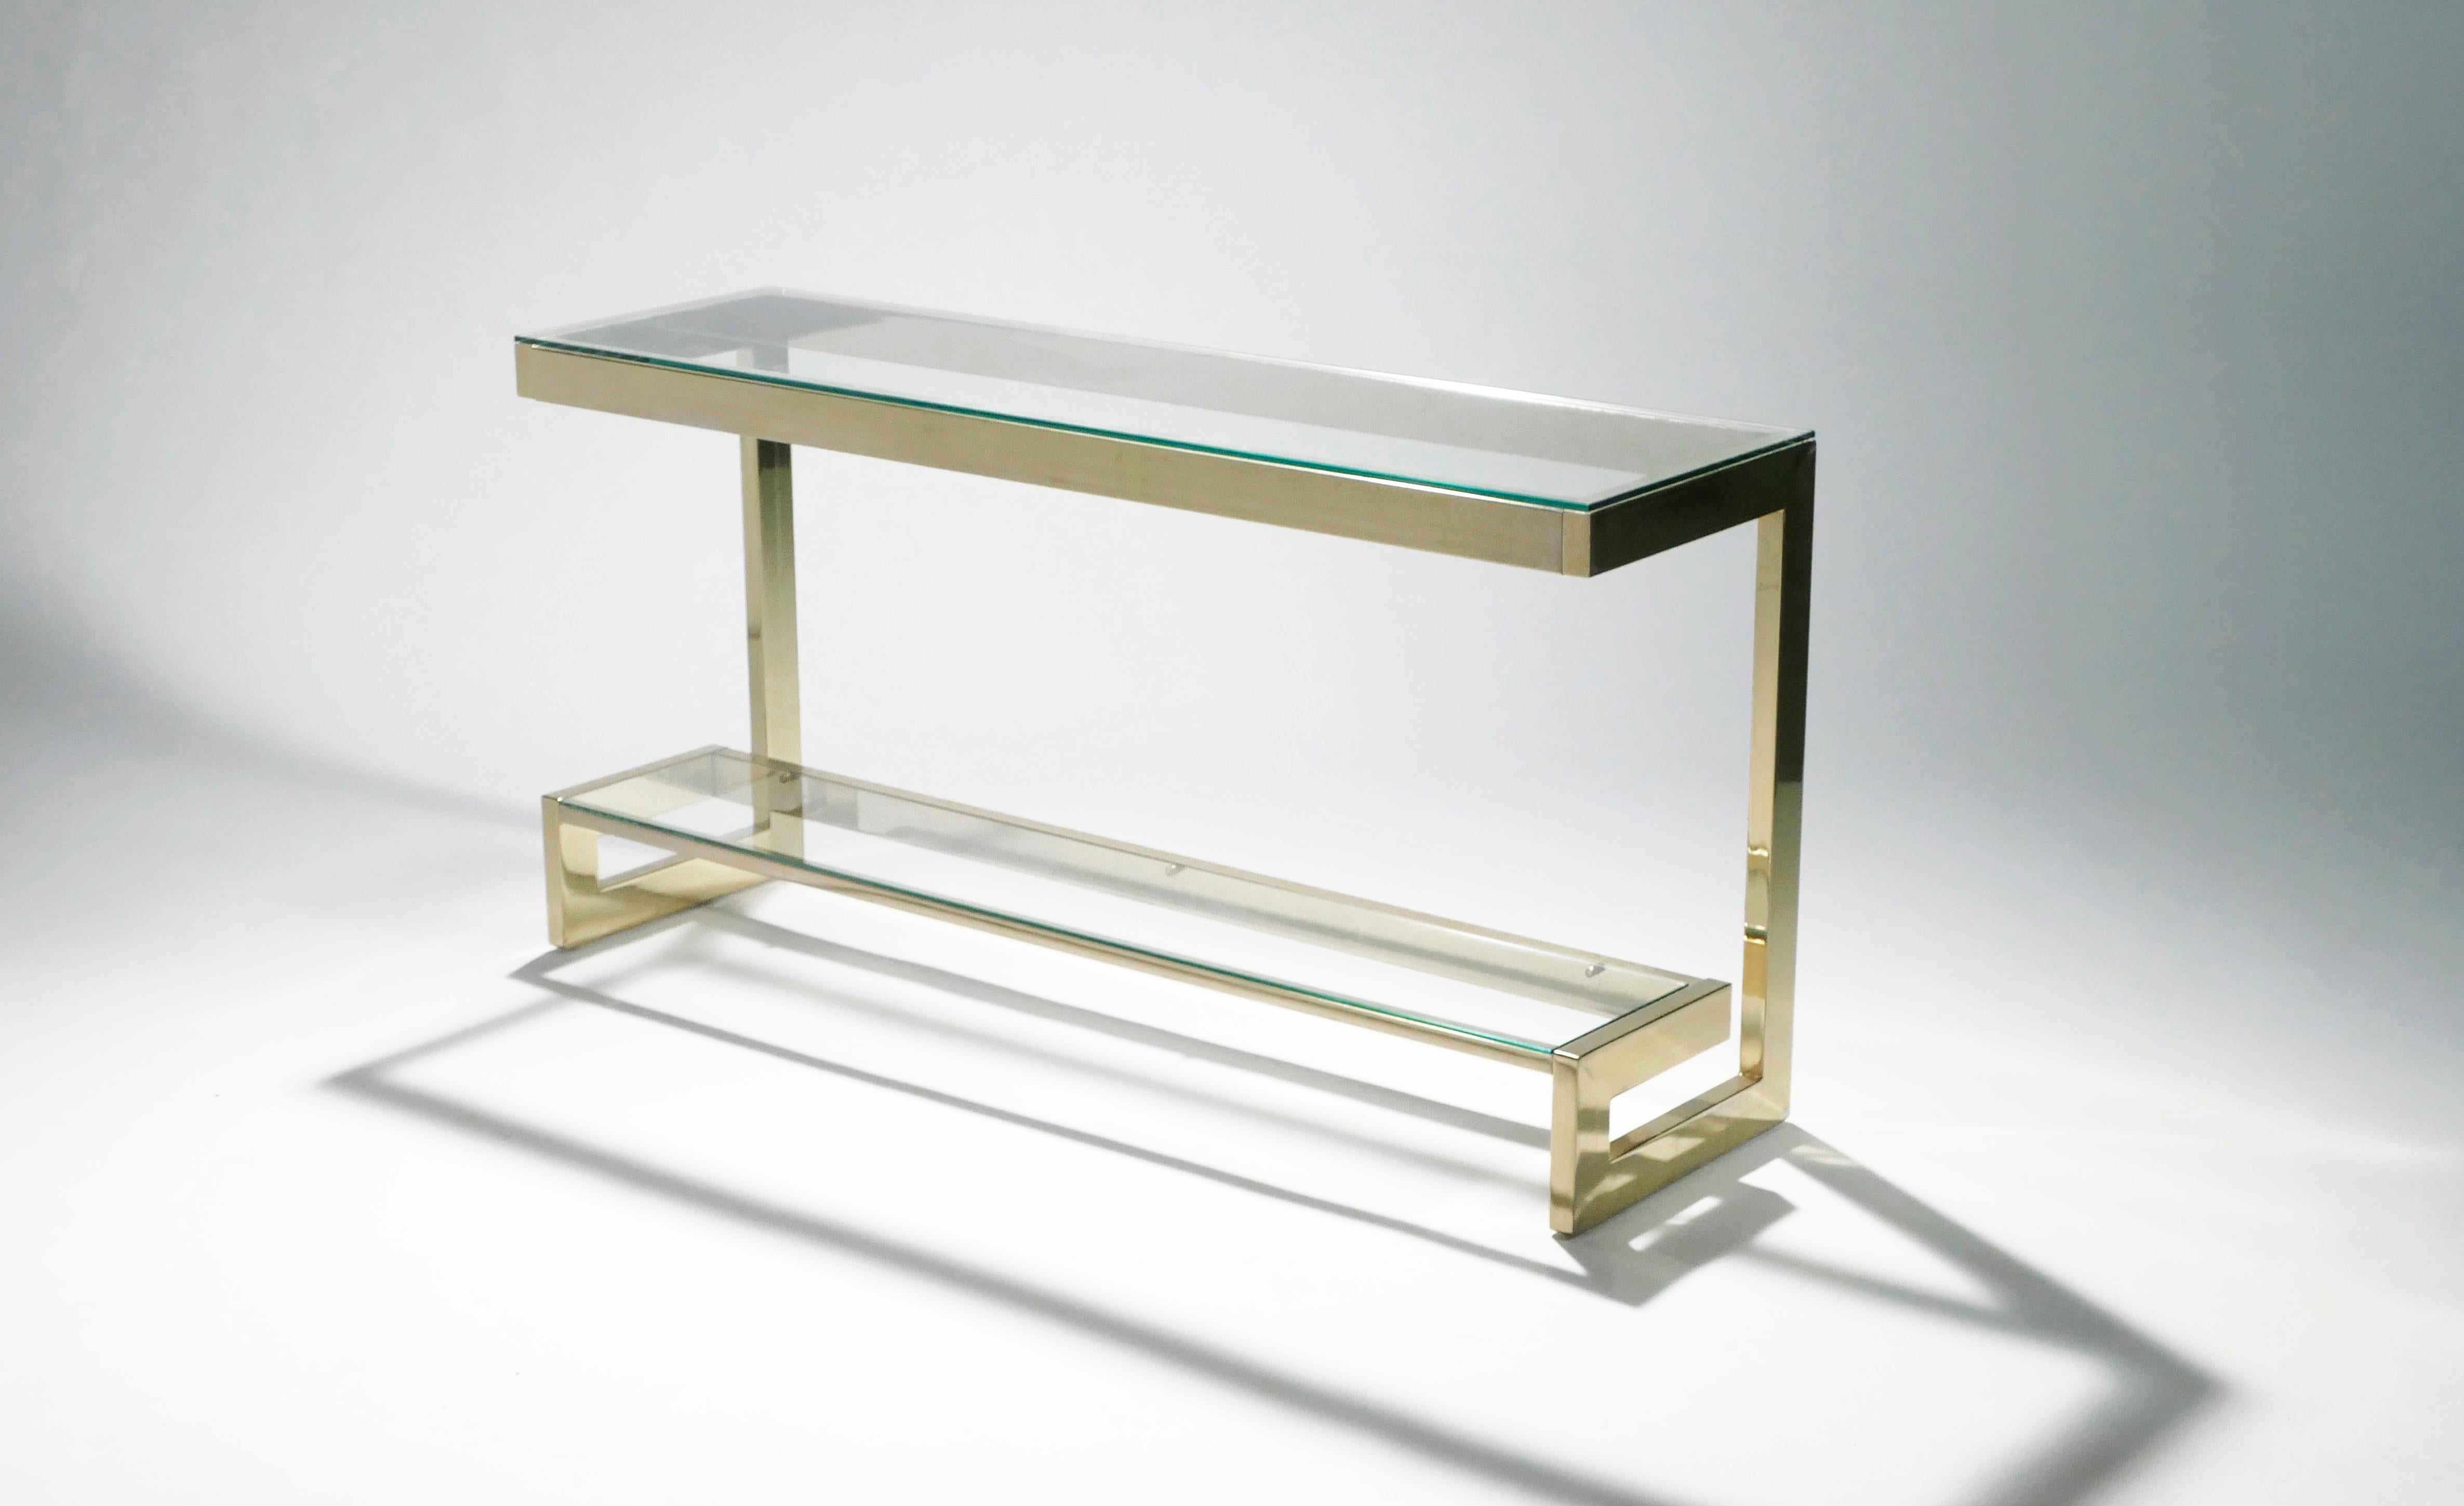 Minimalistic lines become lighter than air in this 1970s console table. Crafted by Guy Lefevre for Maison Jansen, it features sleek expanses of crystal-clear glass set into a structured gold-tone brass frame. The floating two-tier design is